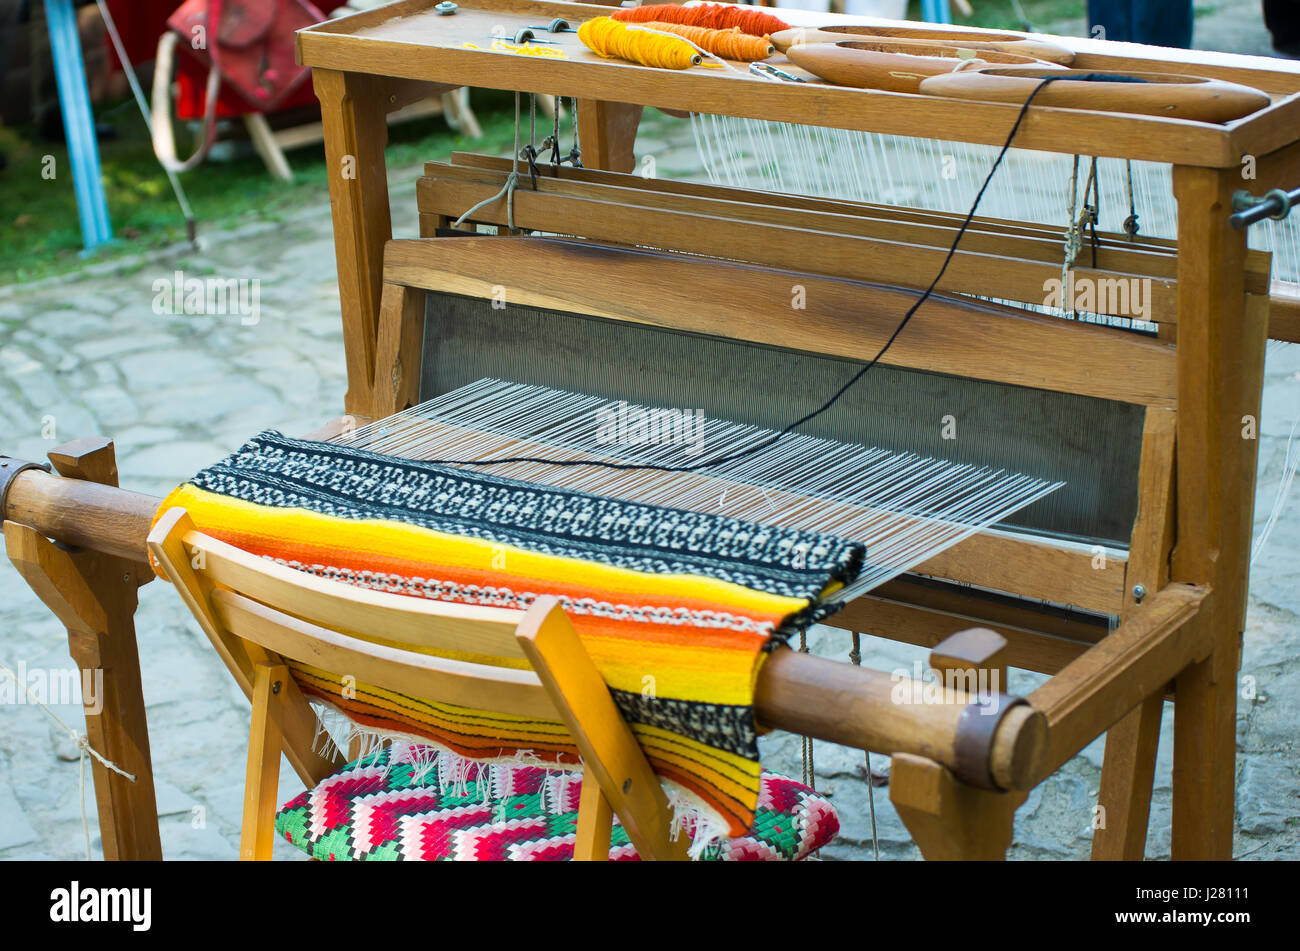 Hand loom with many colorful woolen threads Stock Photo